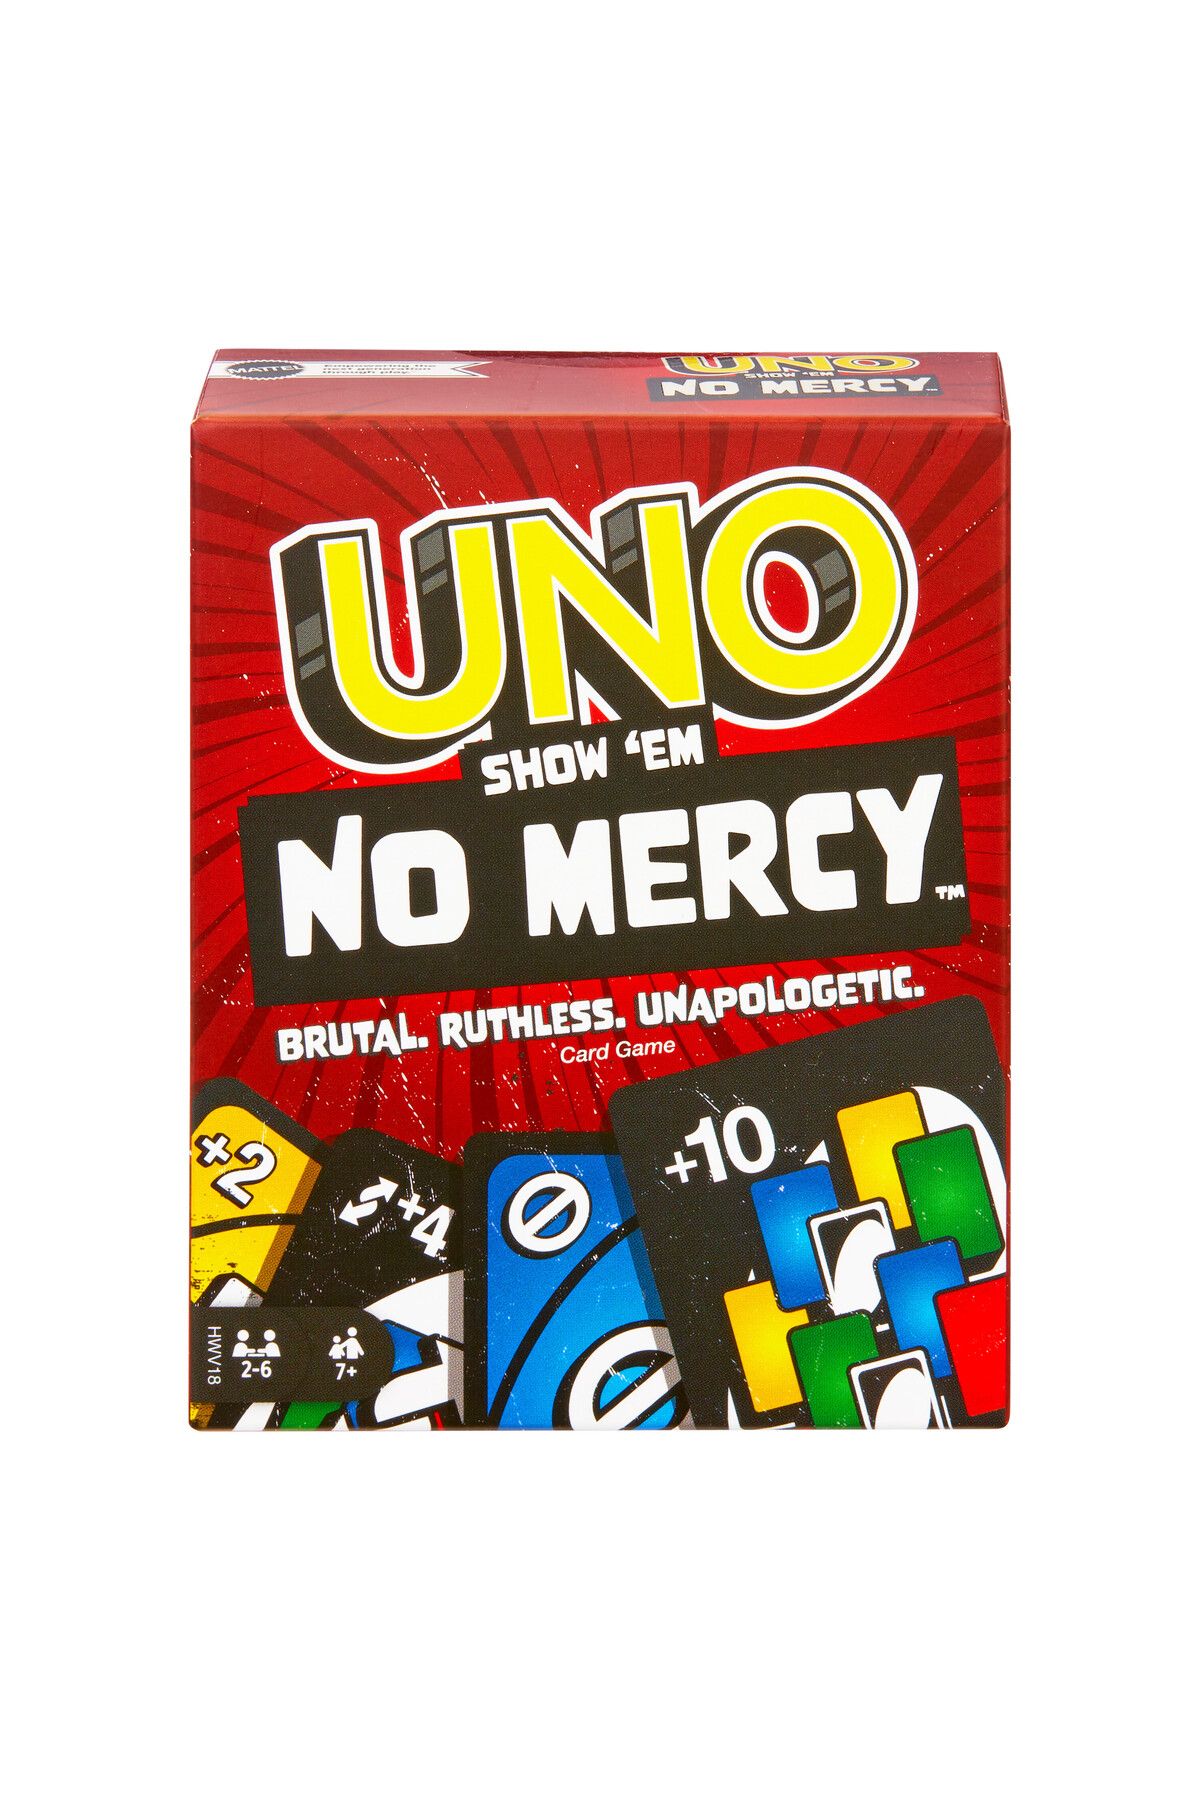 UNO Show ‘em No Mercy Card Game for Kids Family Parties and With Extra Cards Special Rules and Tougher